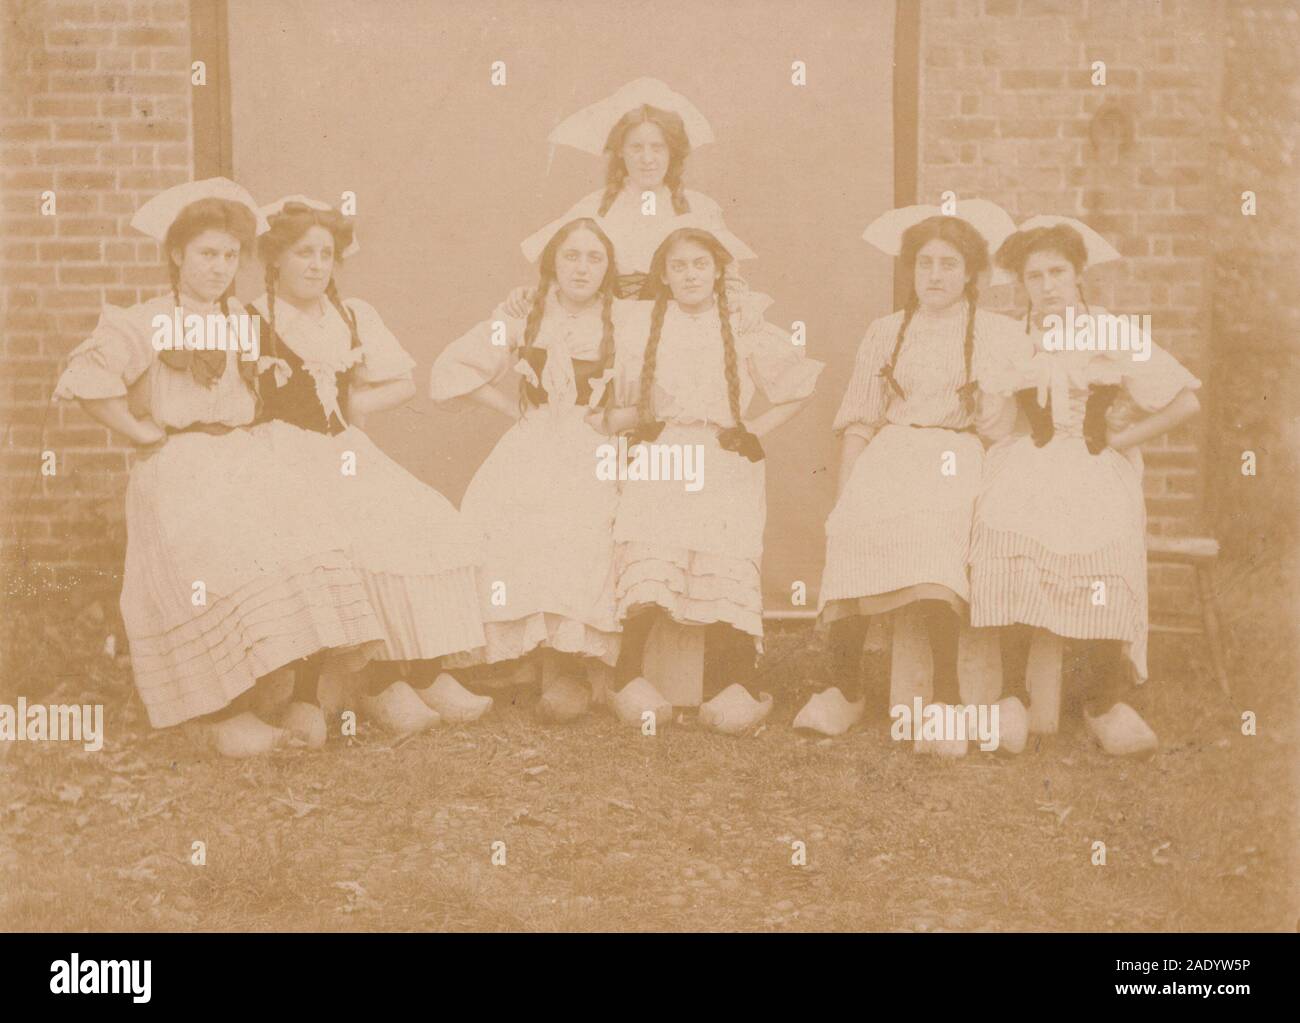 Vintage Early 20th Century Photographic Postcard Showing Seven Girls Dressed up in Dutch Costumes. Stock Photo